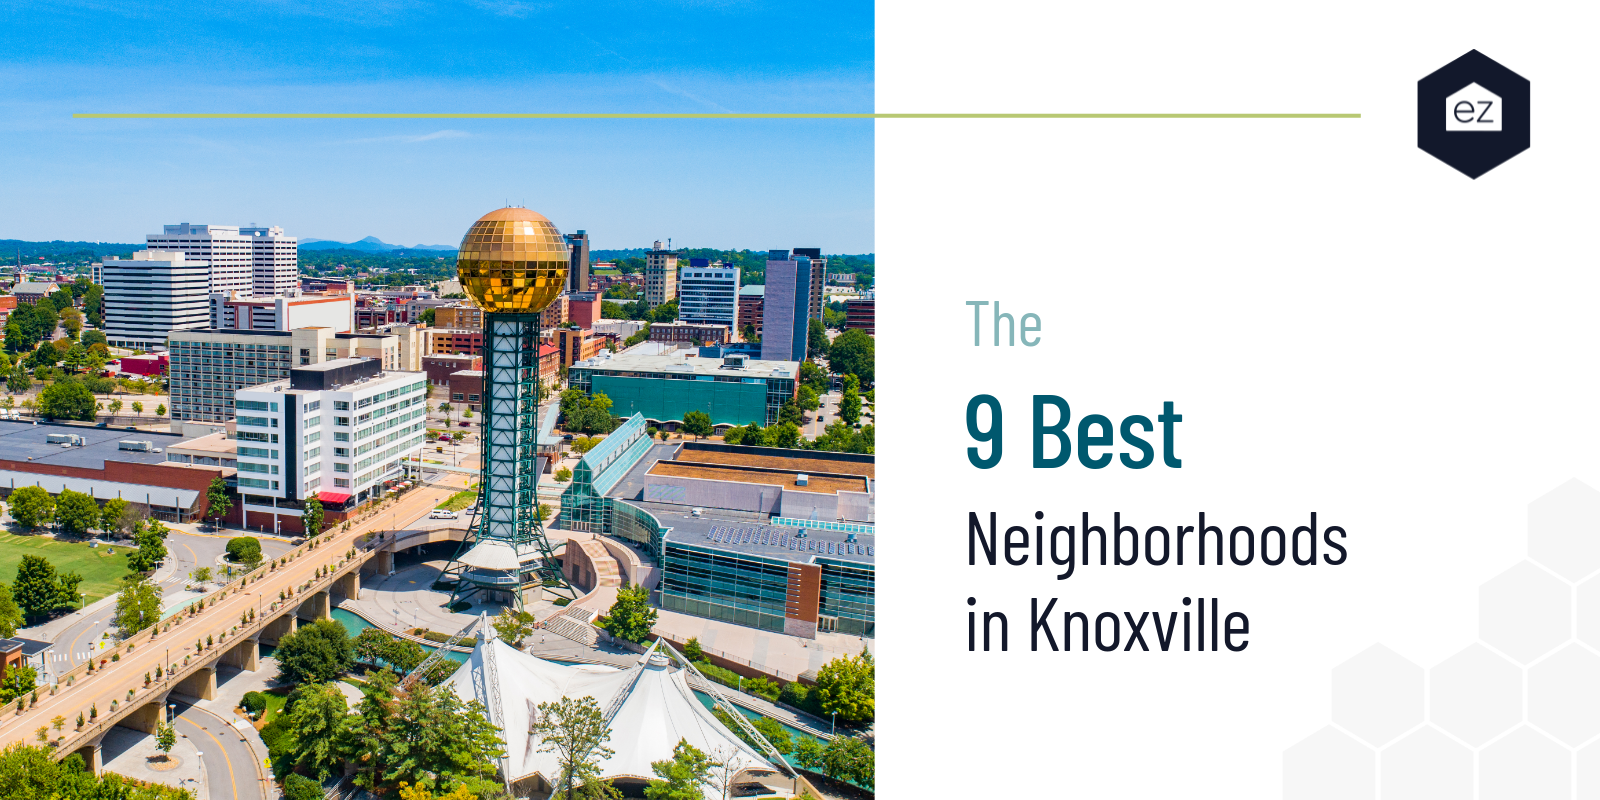 Our 9 Best Neighborhoods in Knoxville